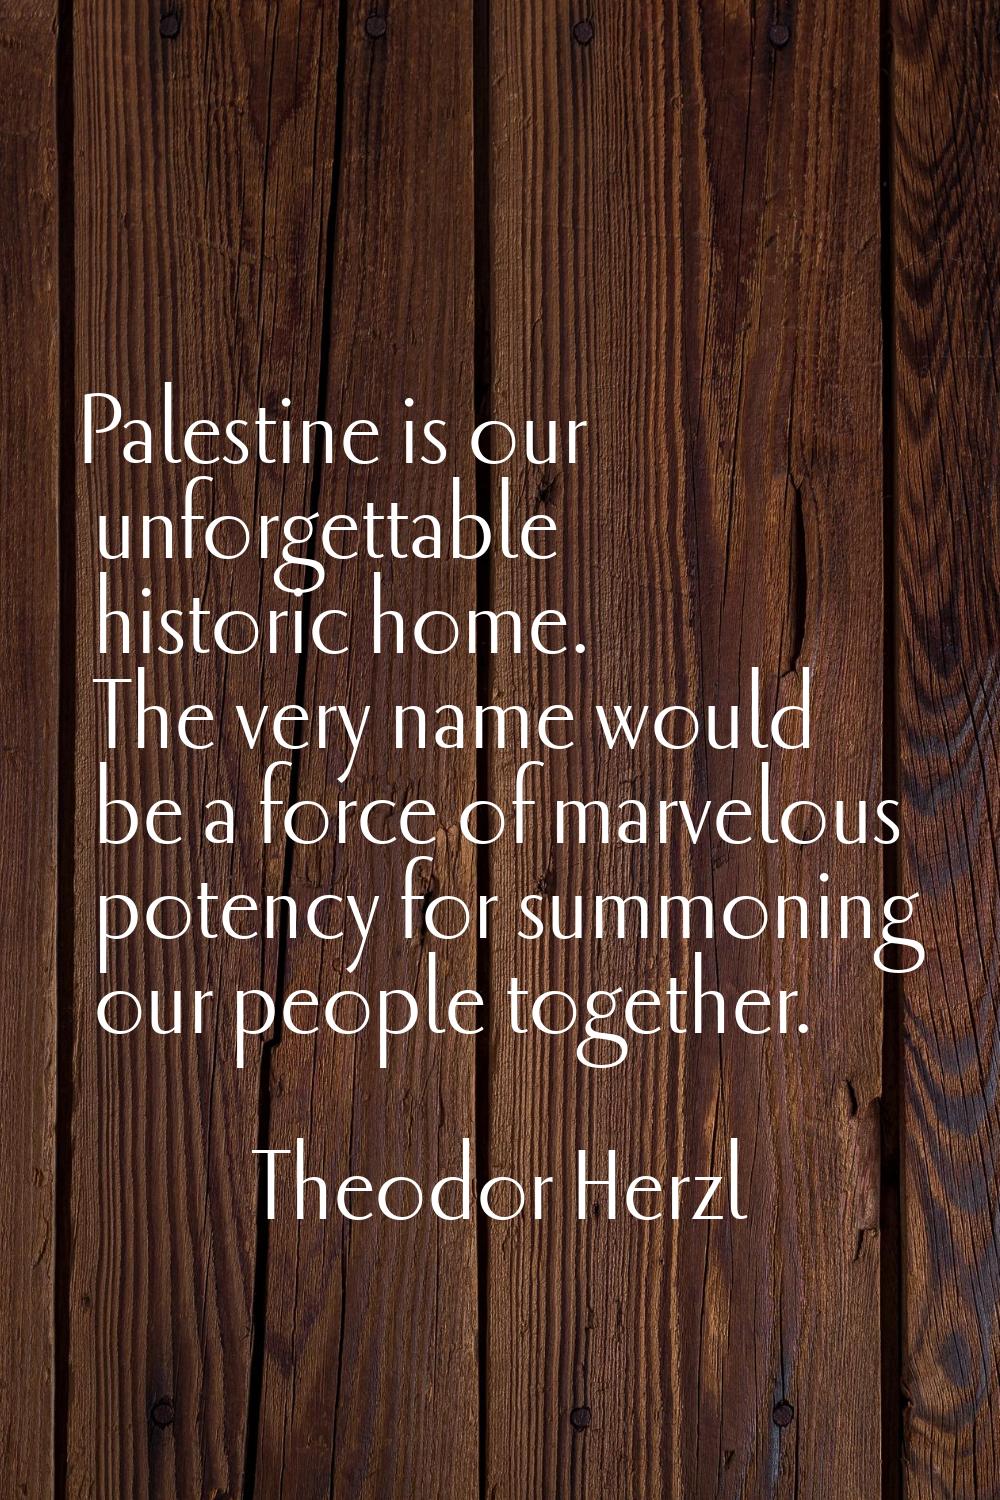 Palestine is our unforgettable historic home. The very name would be a force of marvelous potency f